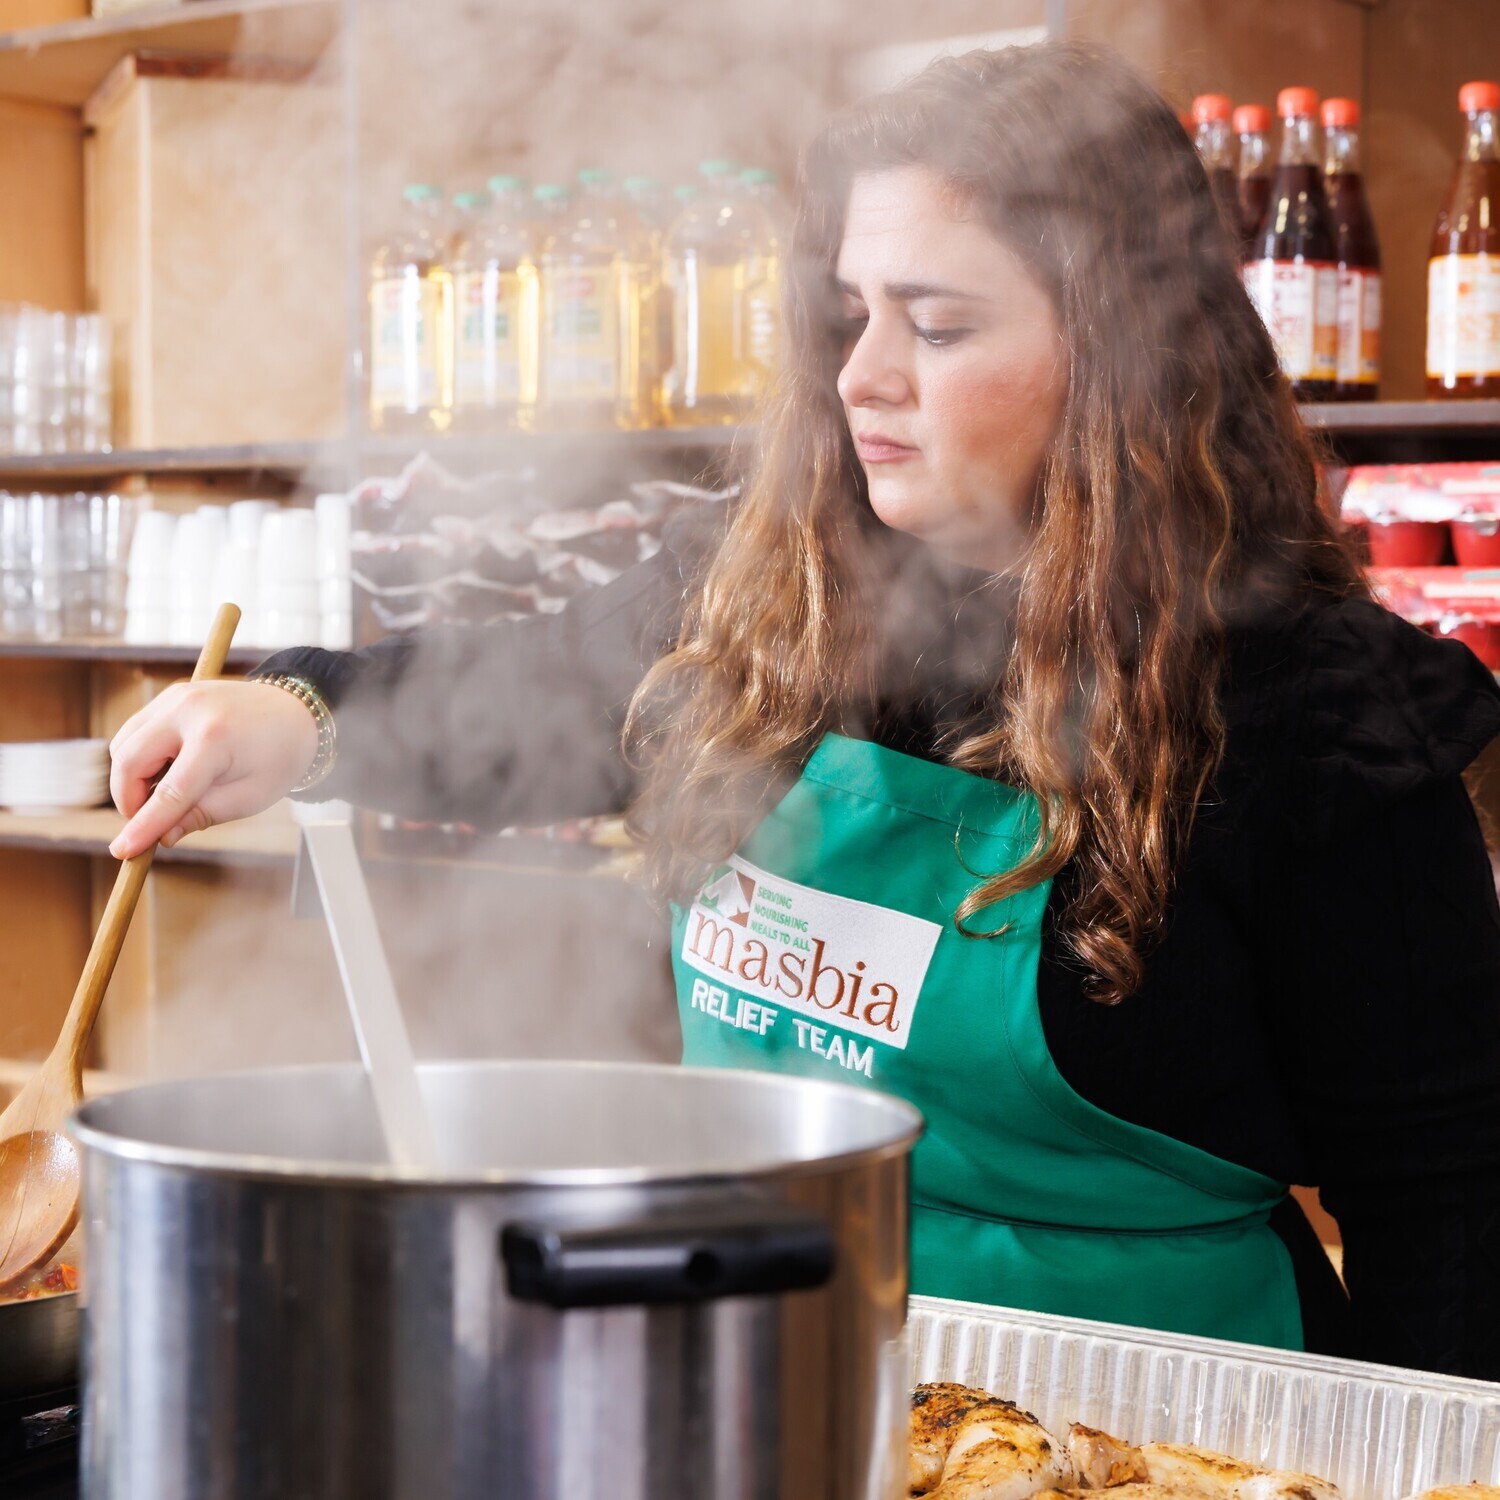 Receive A Cooking Demo From Chanie Apfelbaum For Sponsoring 1,000 Meals At Masbia